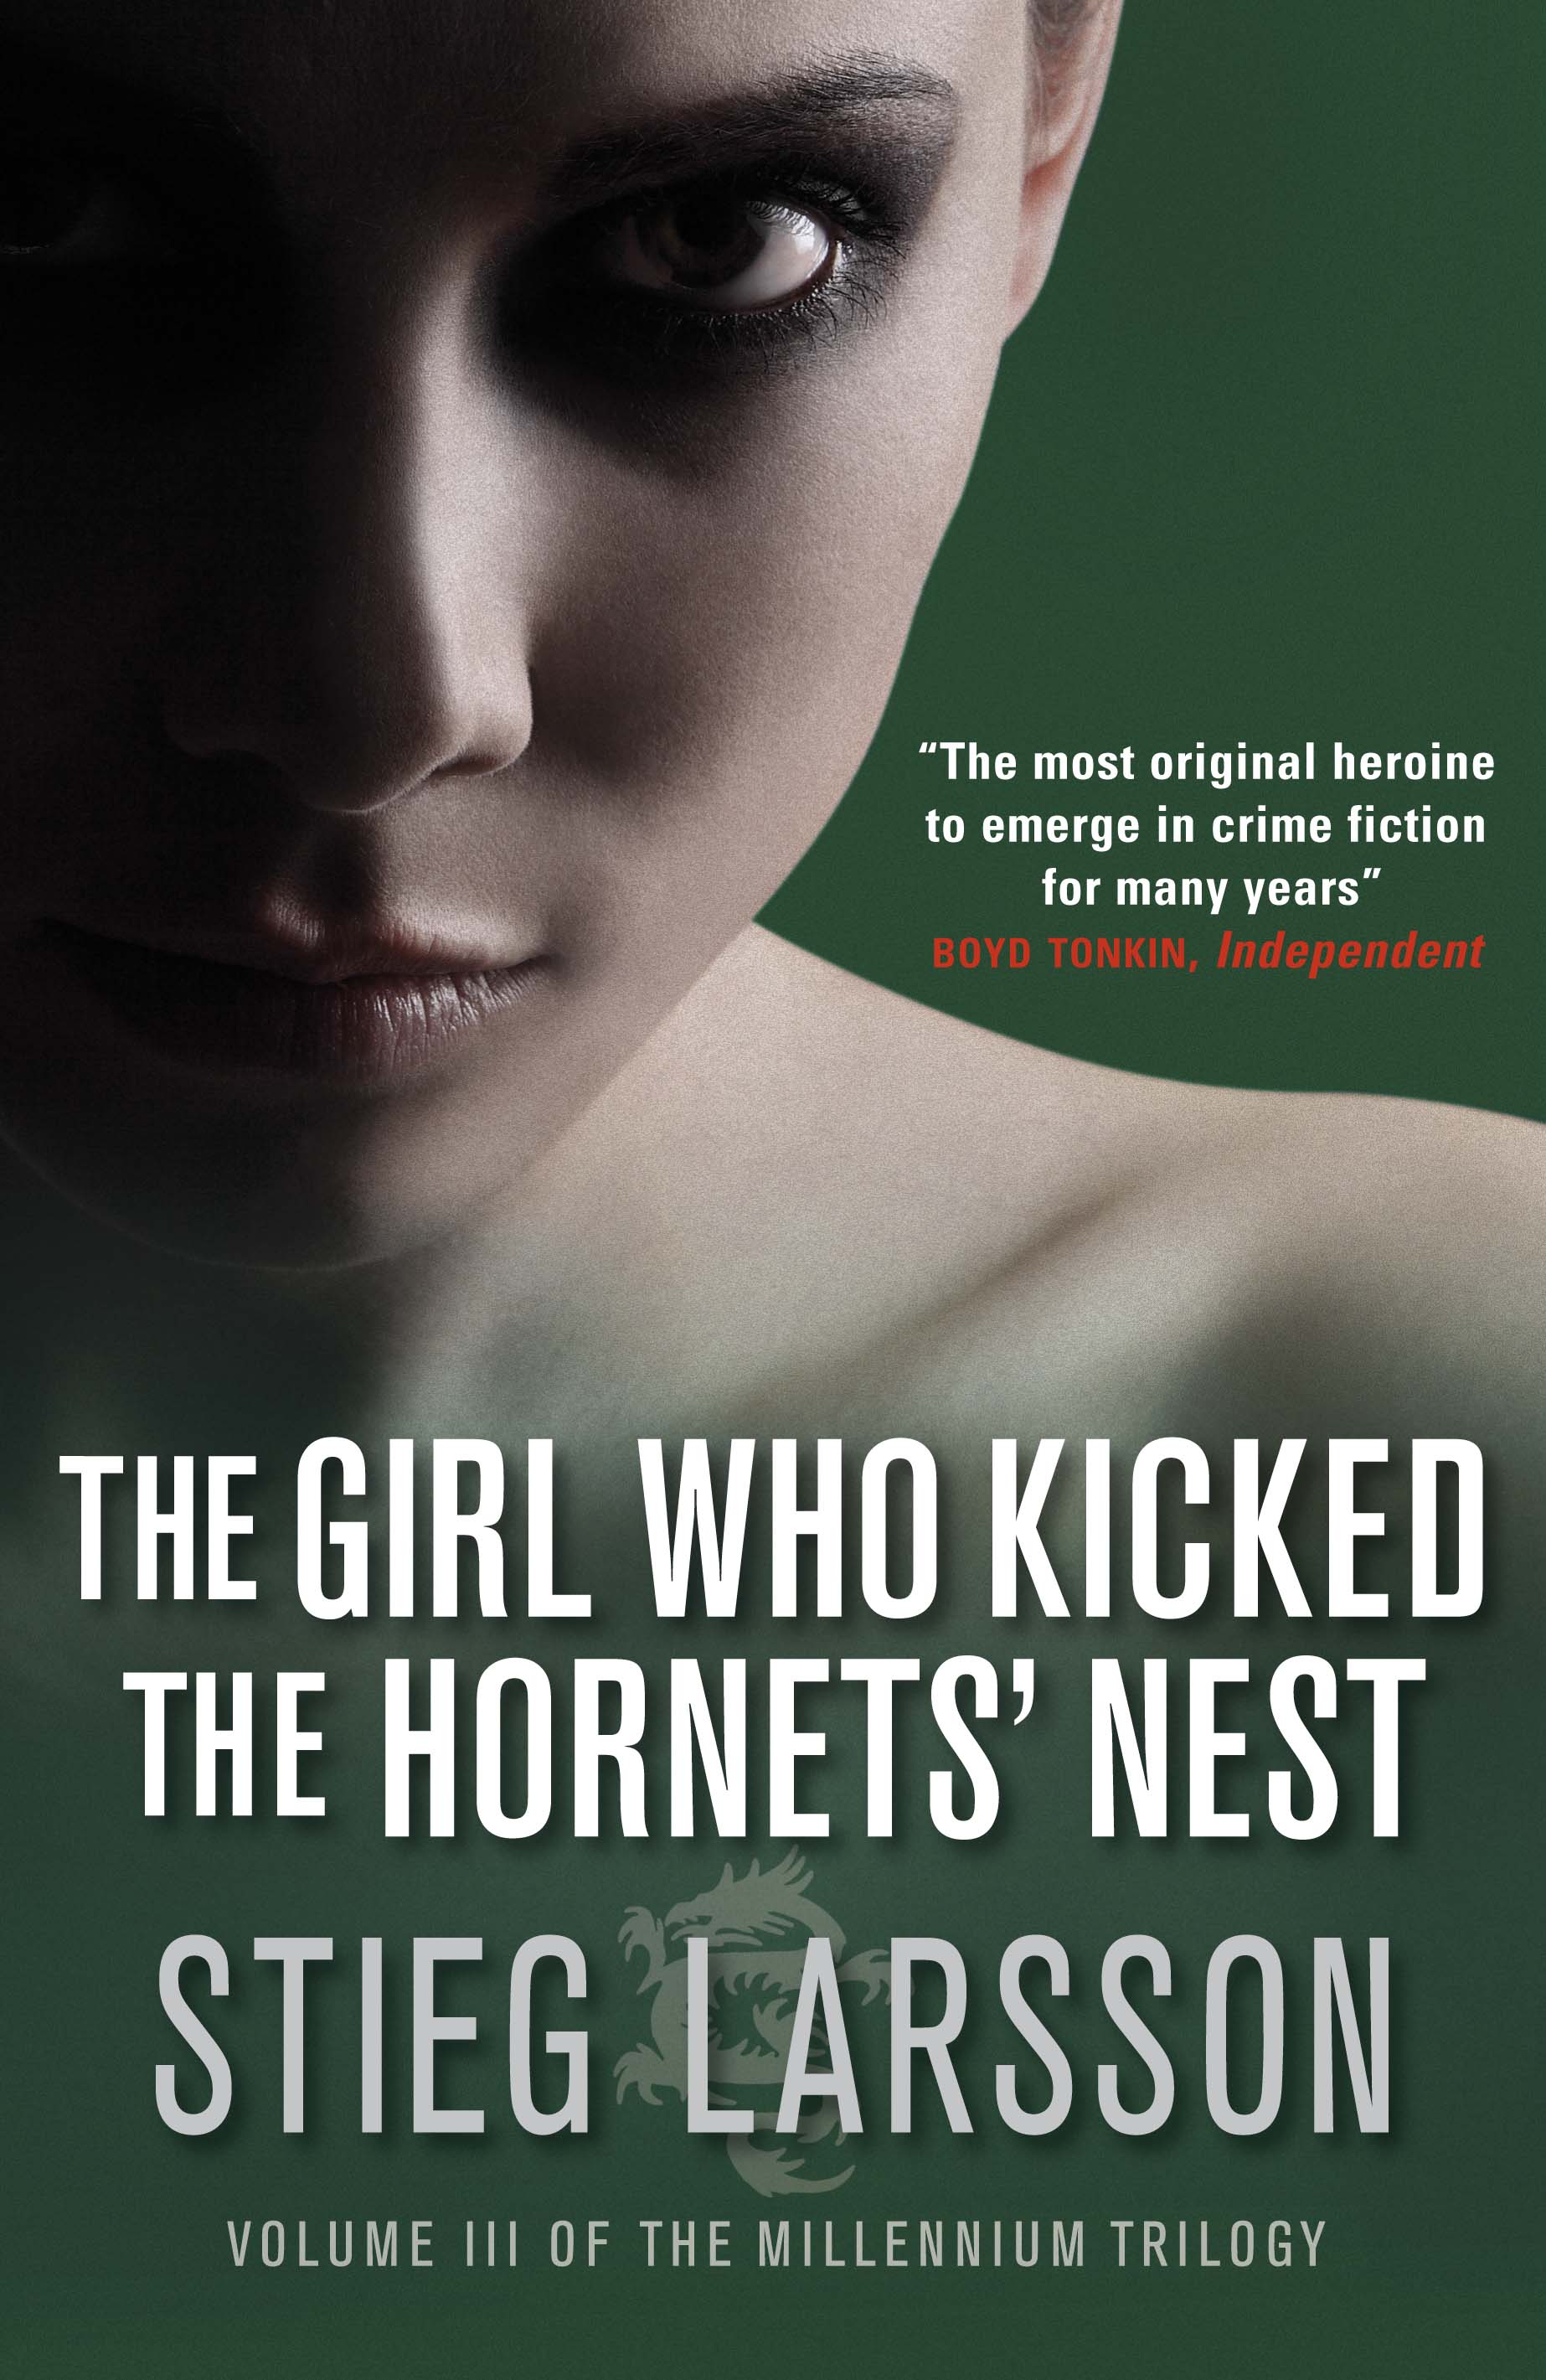 The Girl Who Kicked the Hornet's Nest Stieg Larsson